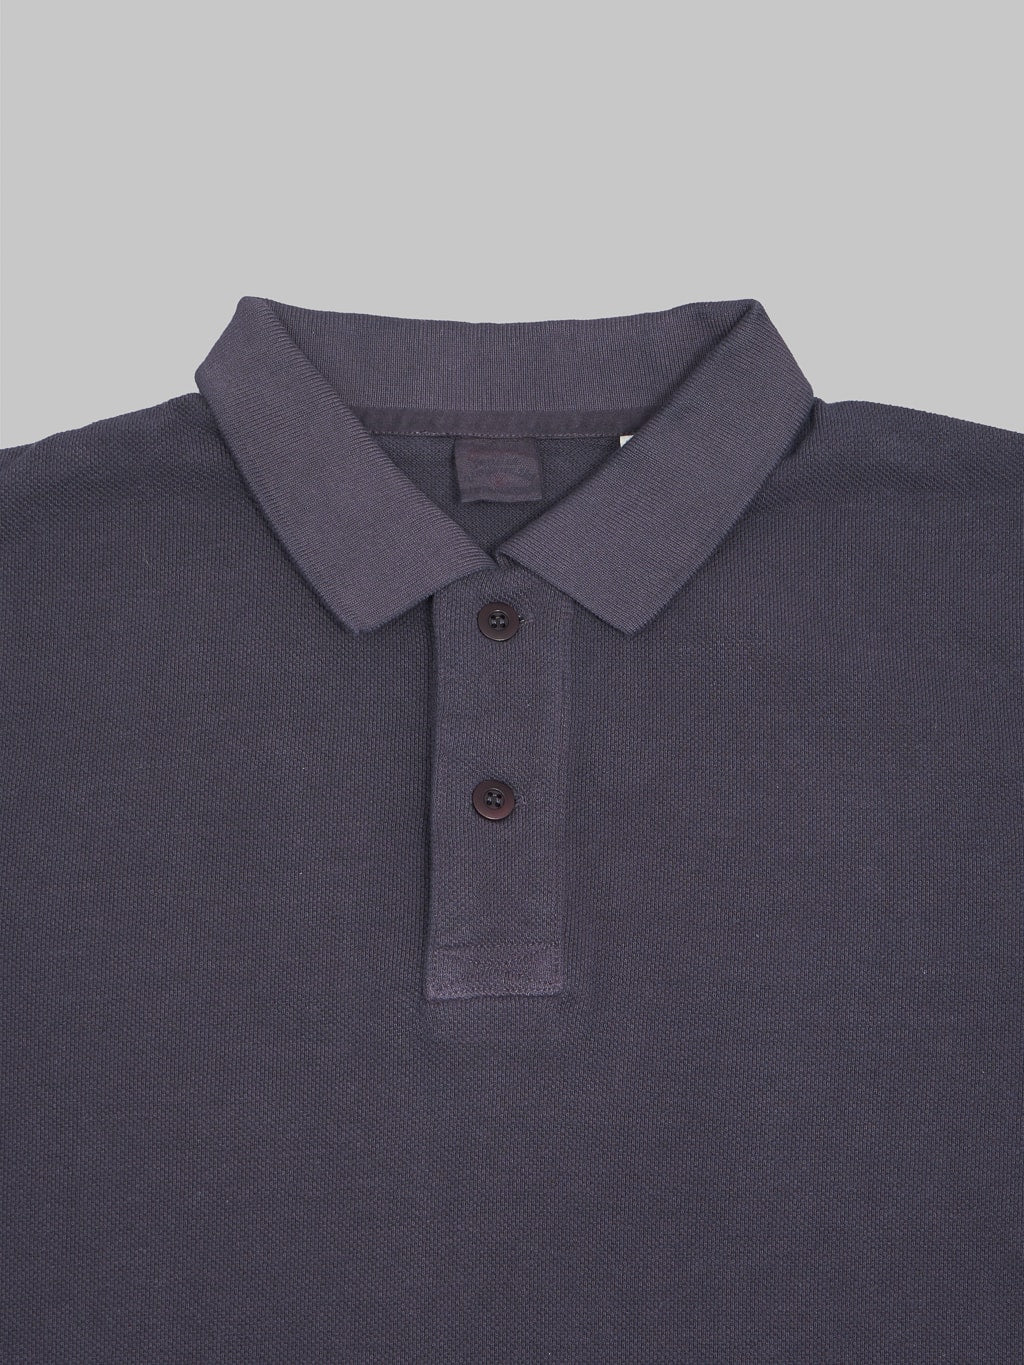 ues polo shirt navy front buttons collar